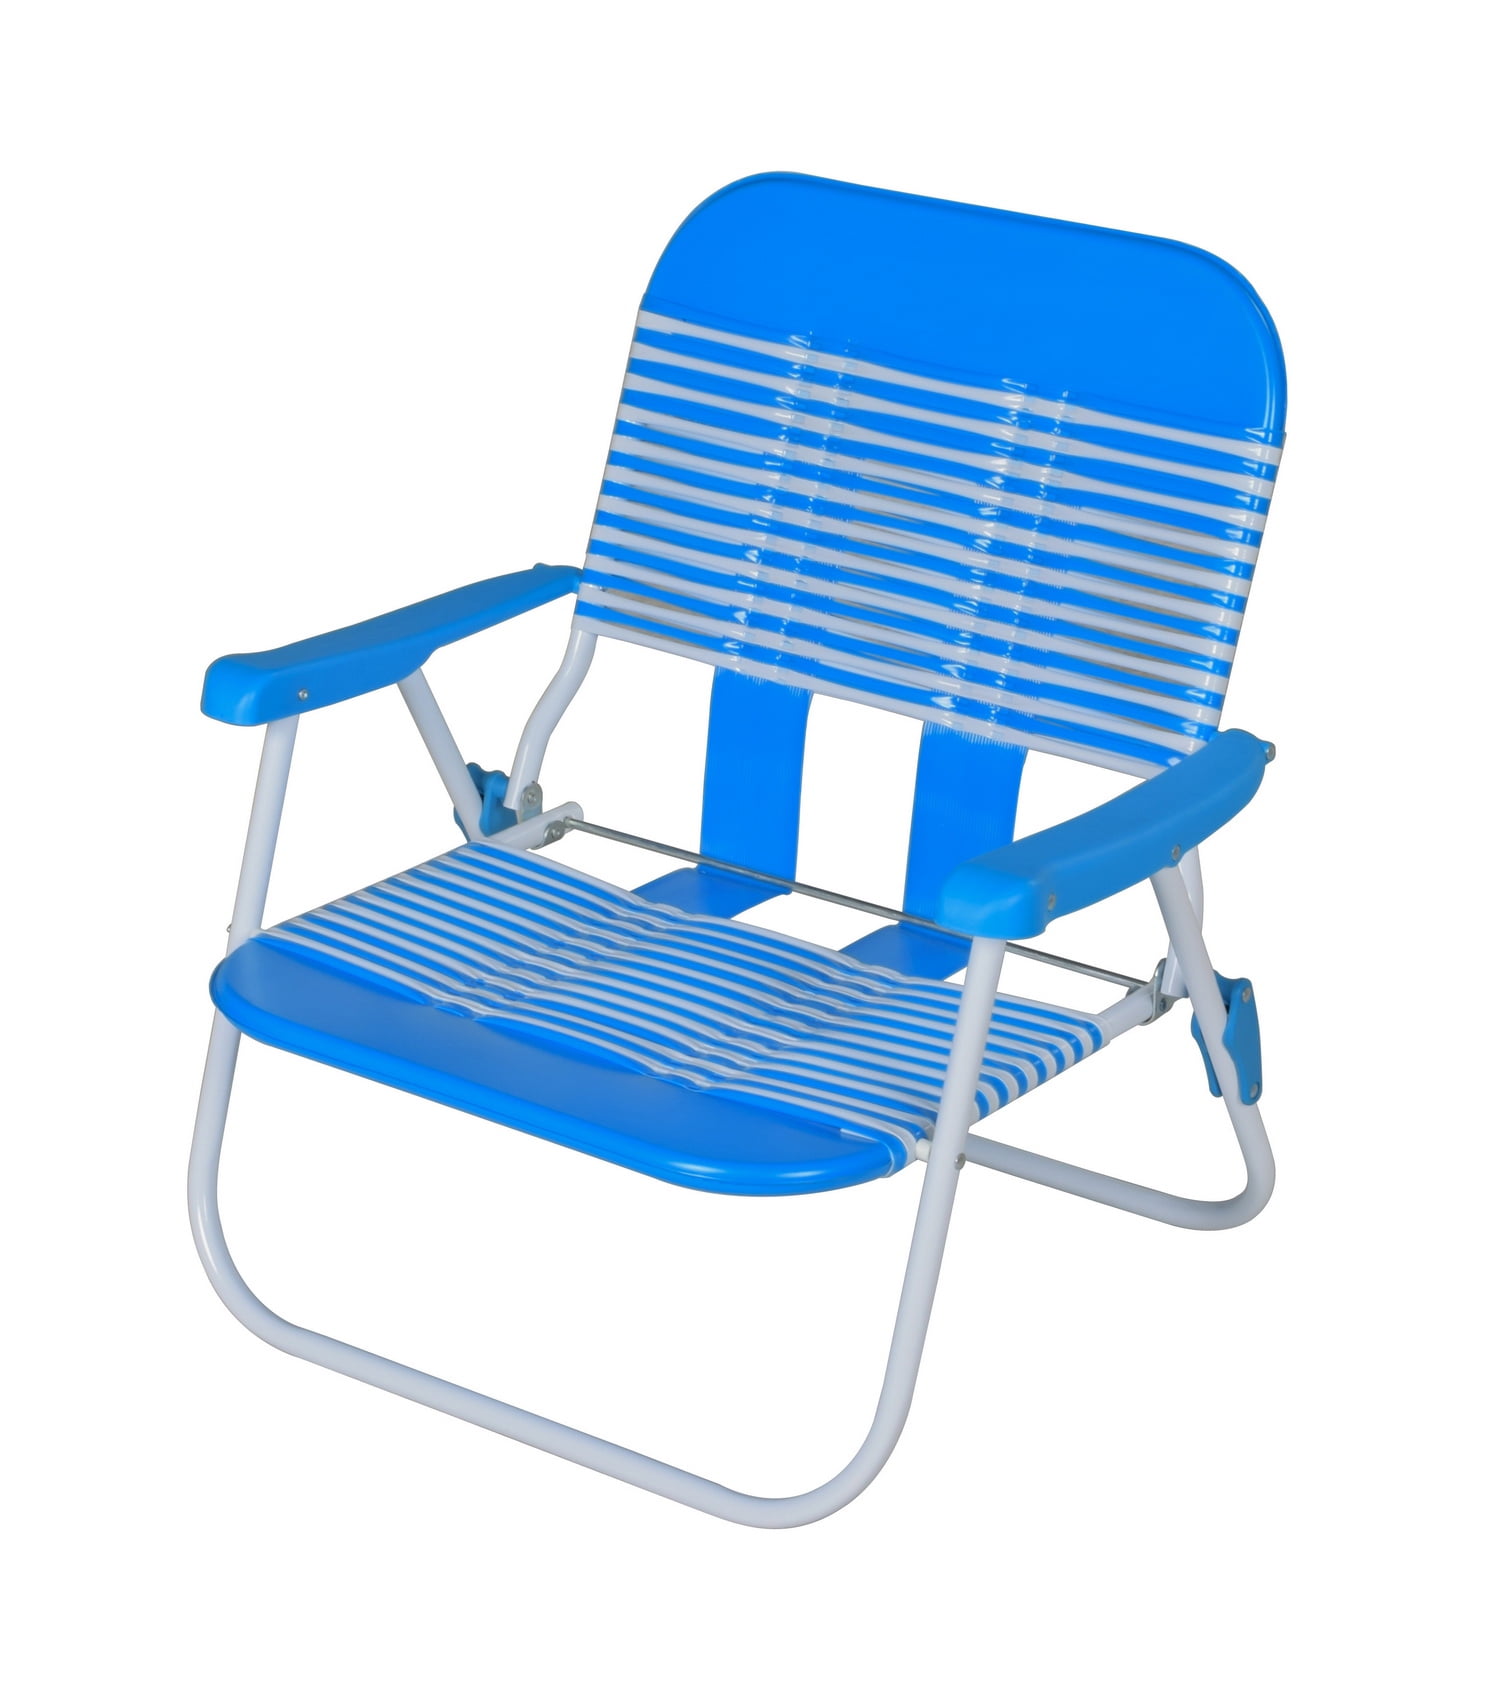  Jelly Folding Beach Chair Room Essentials for Simple Design